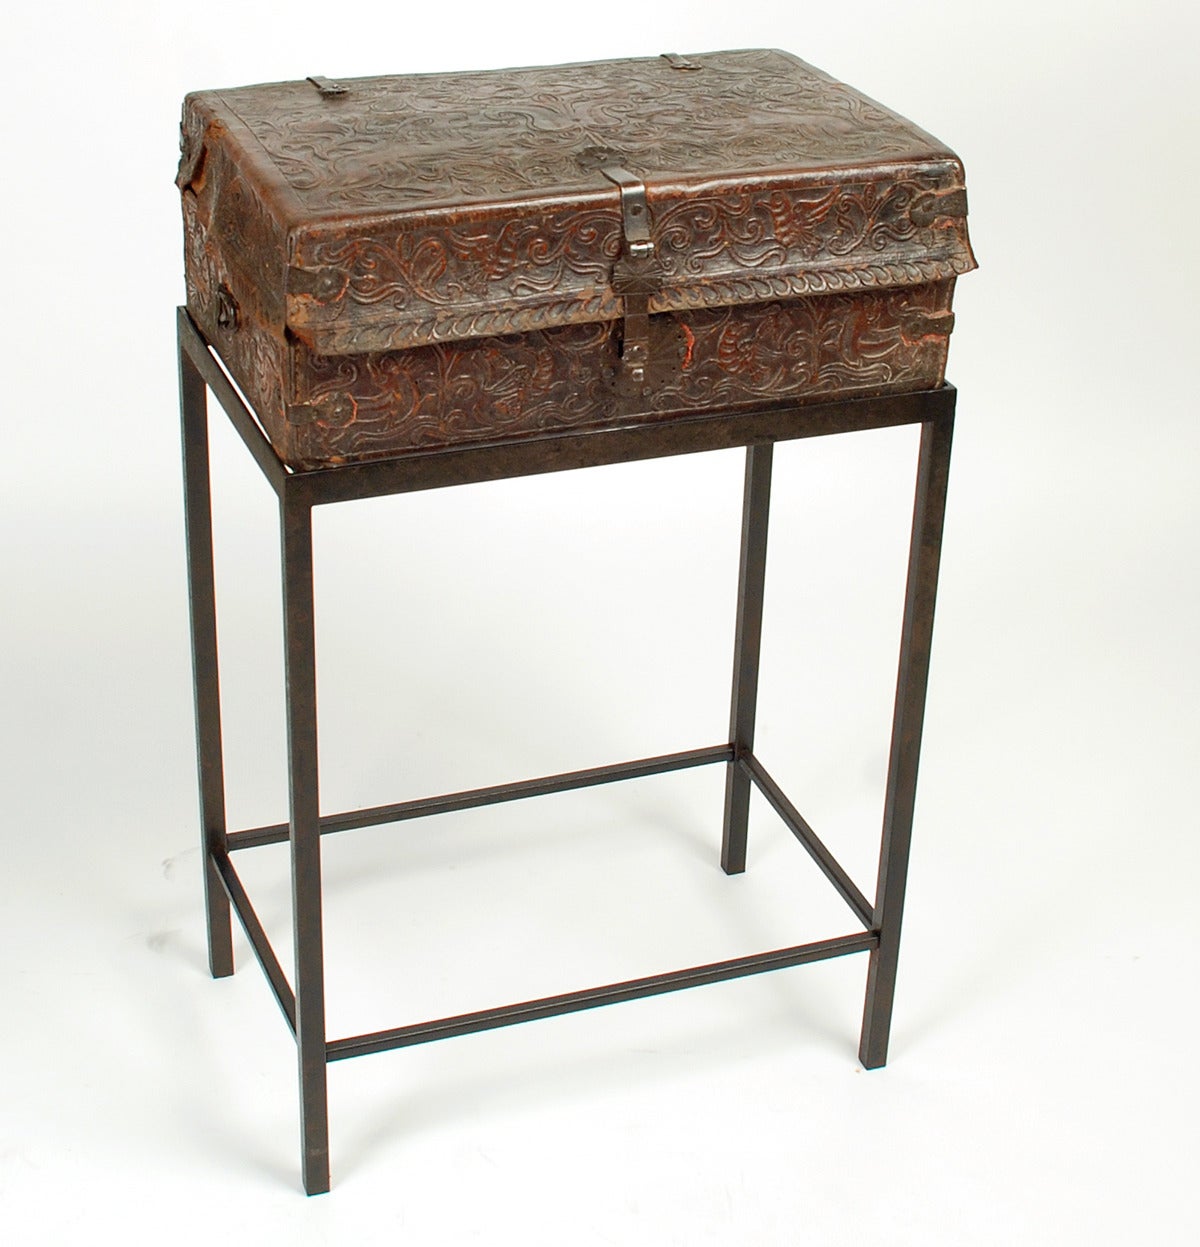 A superb early 18th century hand tooled and embossed leather Spanish Colonial petaca (document box) with original hand-forged iron hasp, hinges and lock-plate. Overall with a rich and lustrous surface patina. Displayed on a high quality custom-made